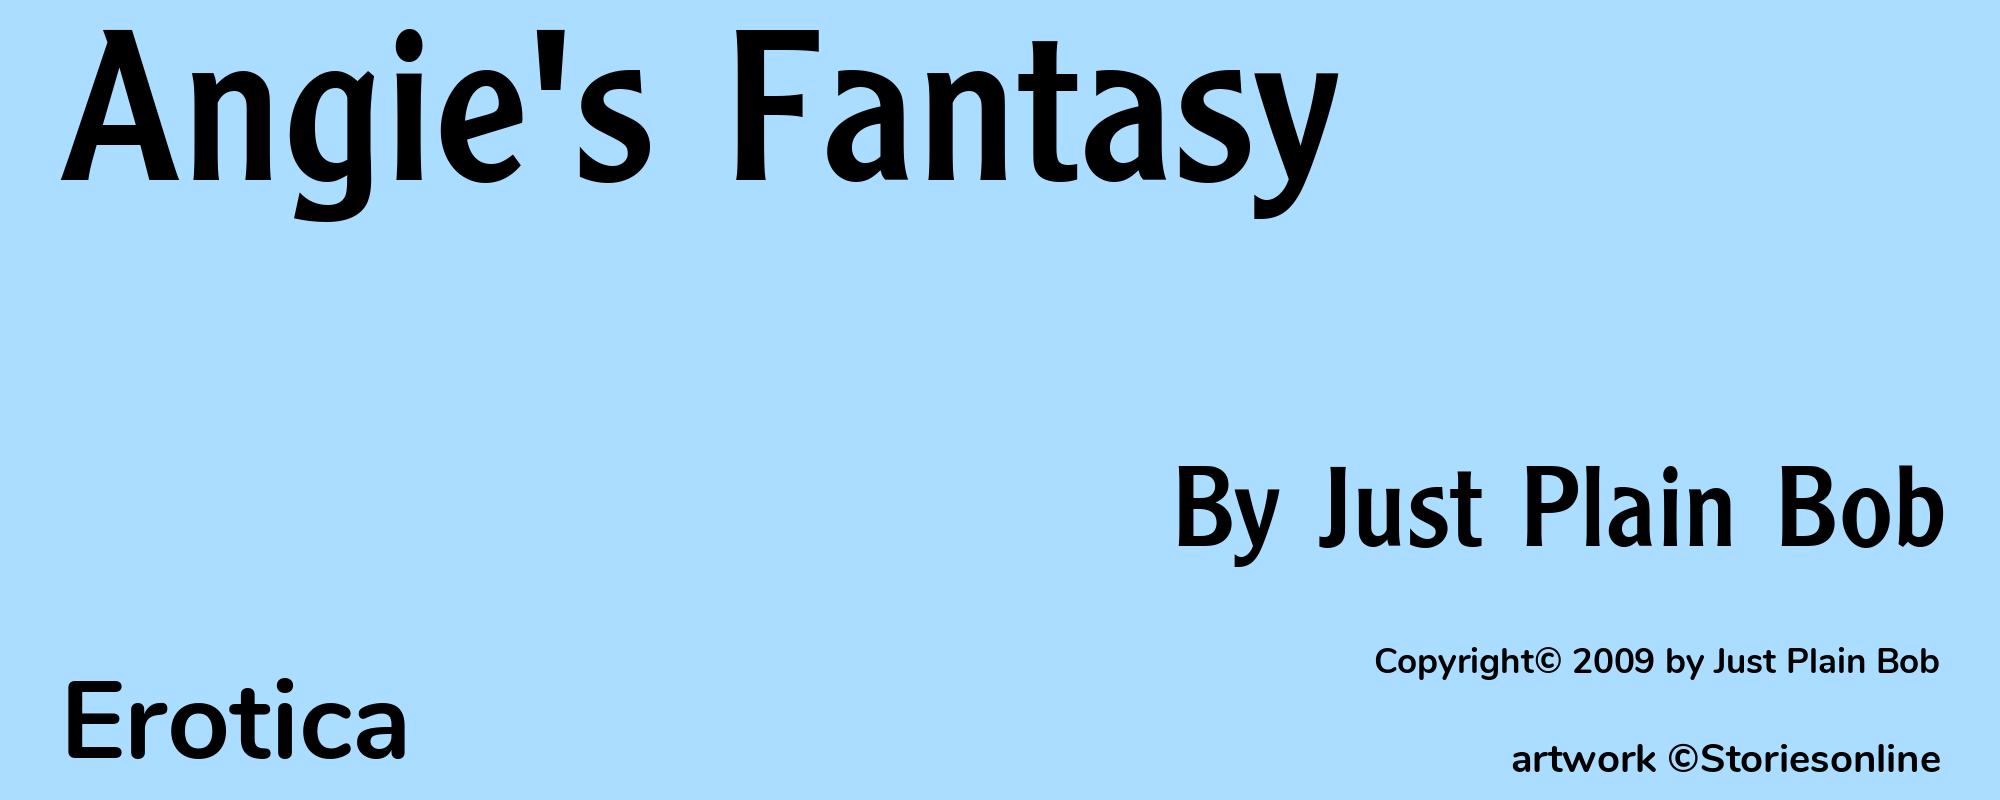 Angie's Fantasy - Cover